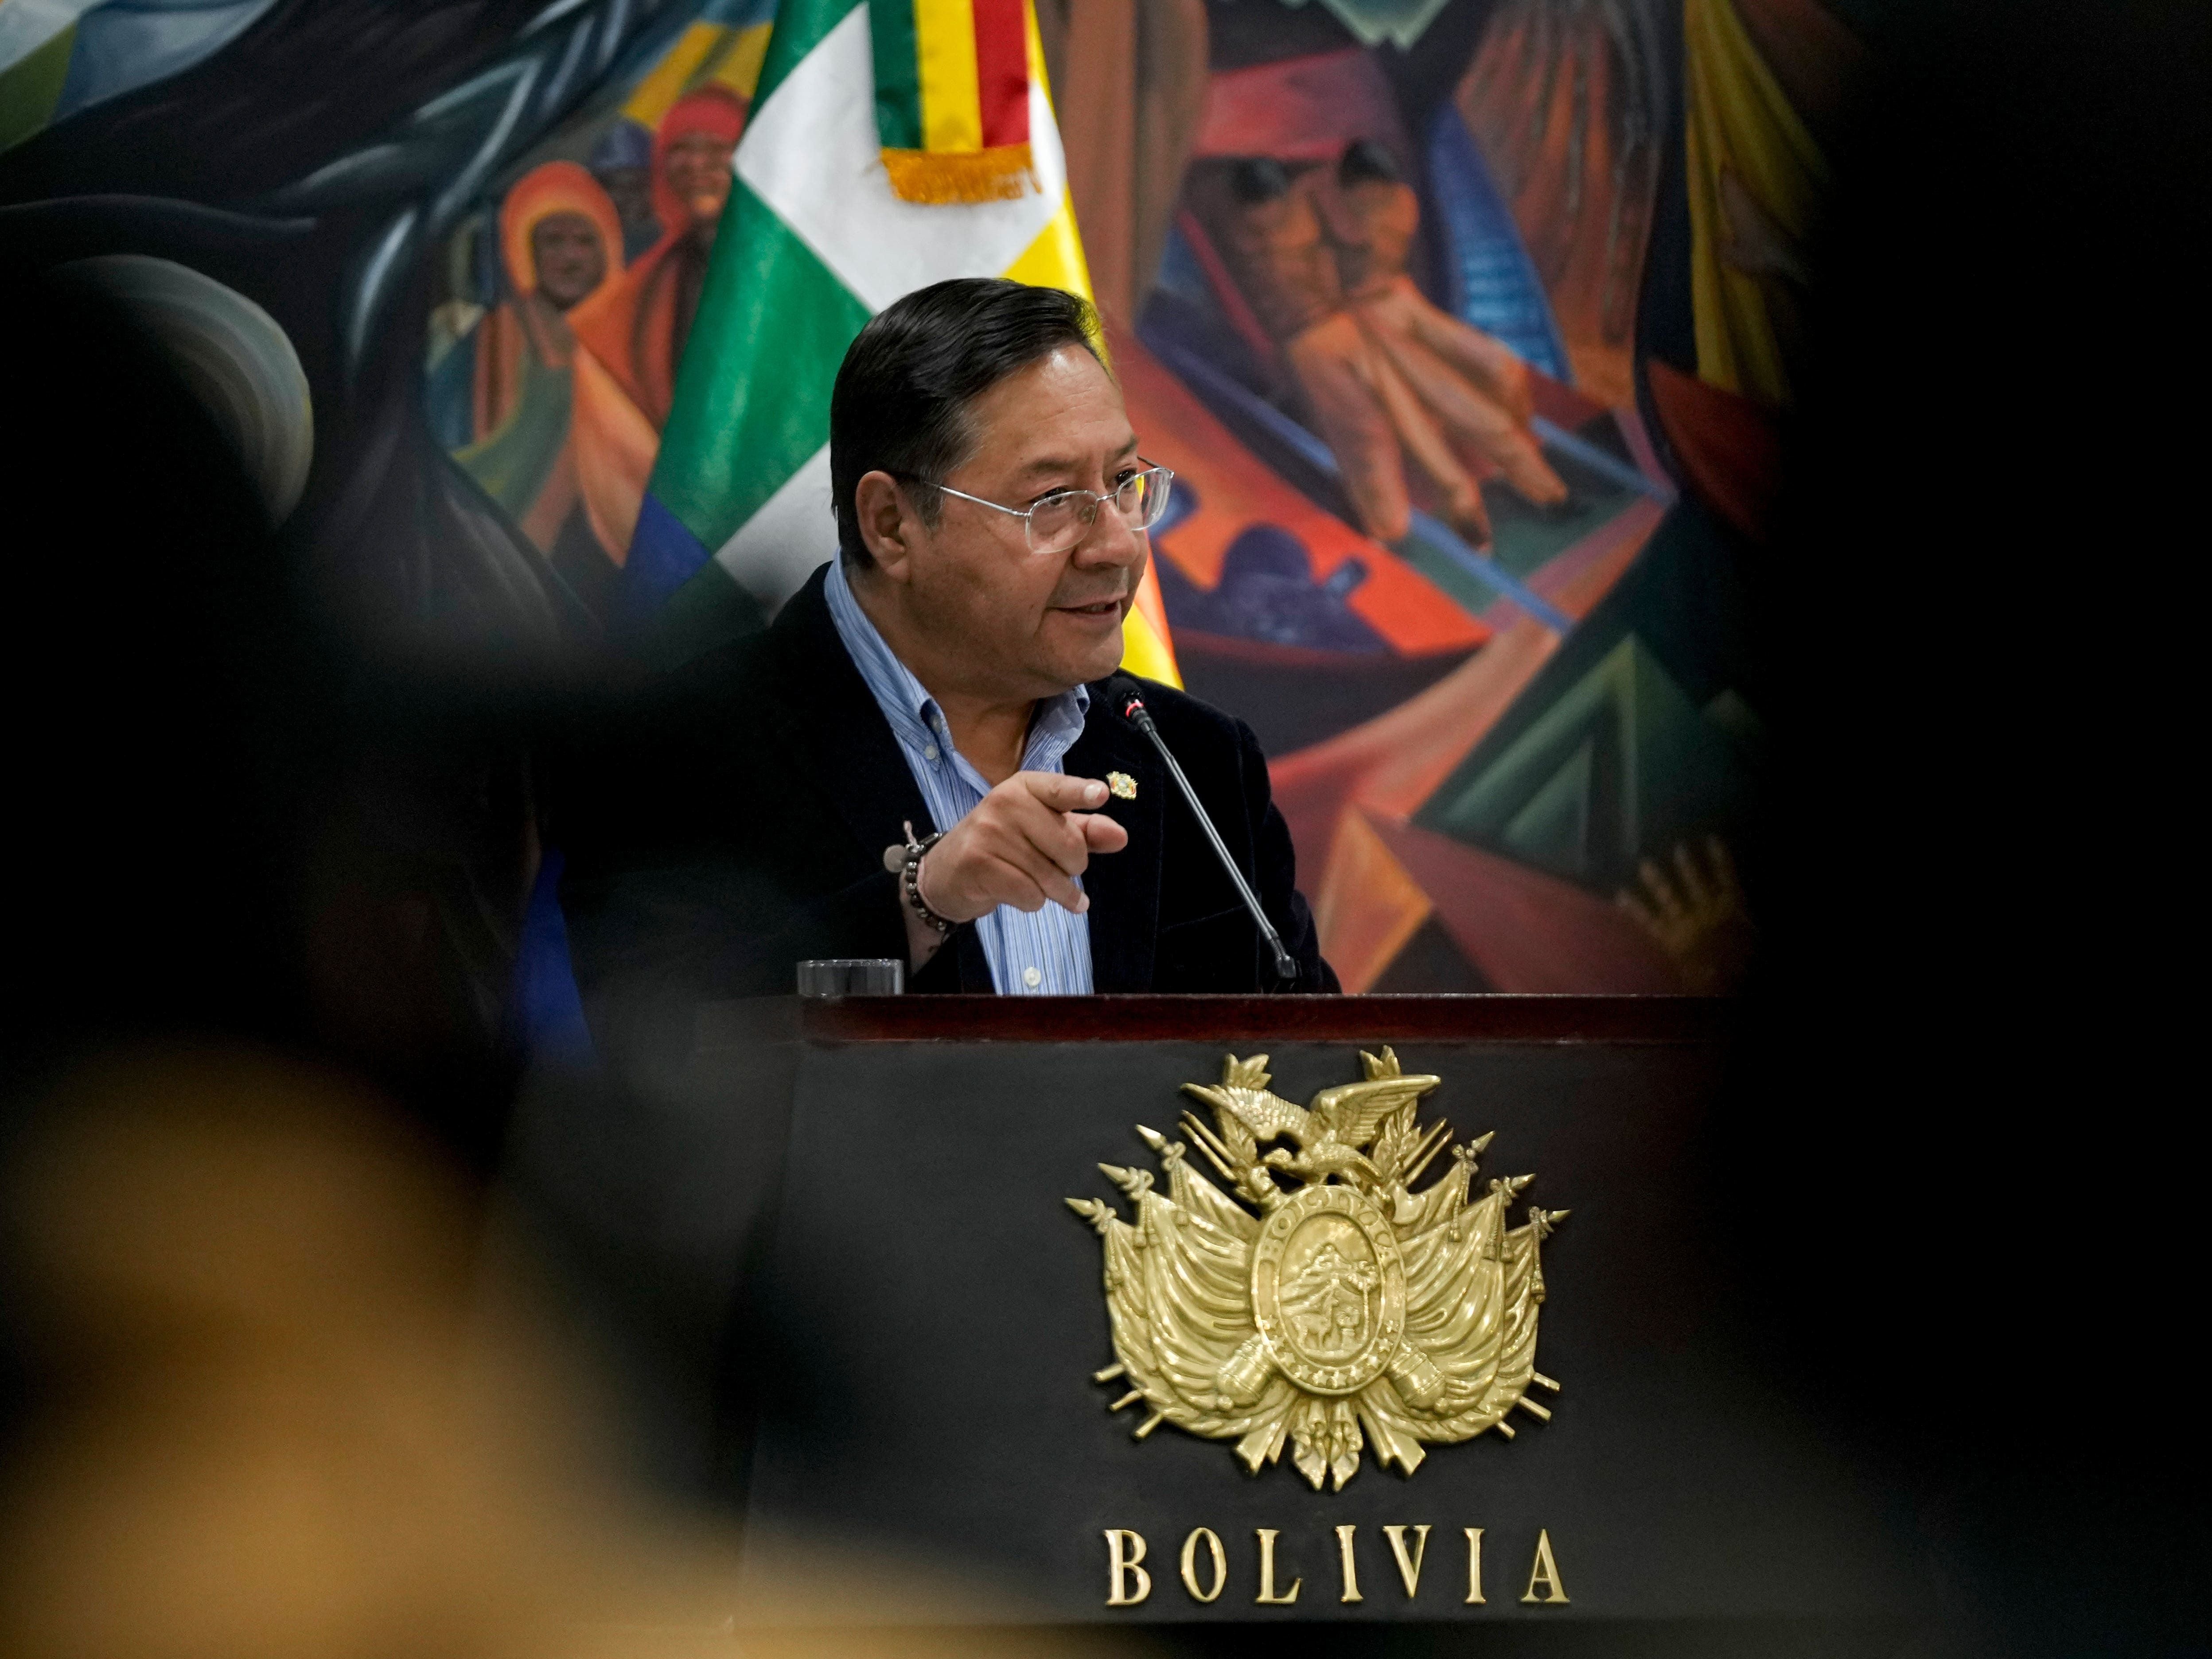 Four more arrested in connection with failed coup, says Bolivian government